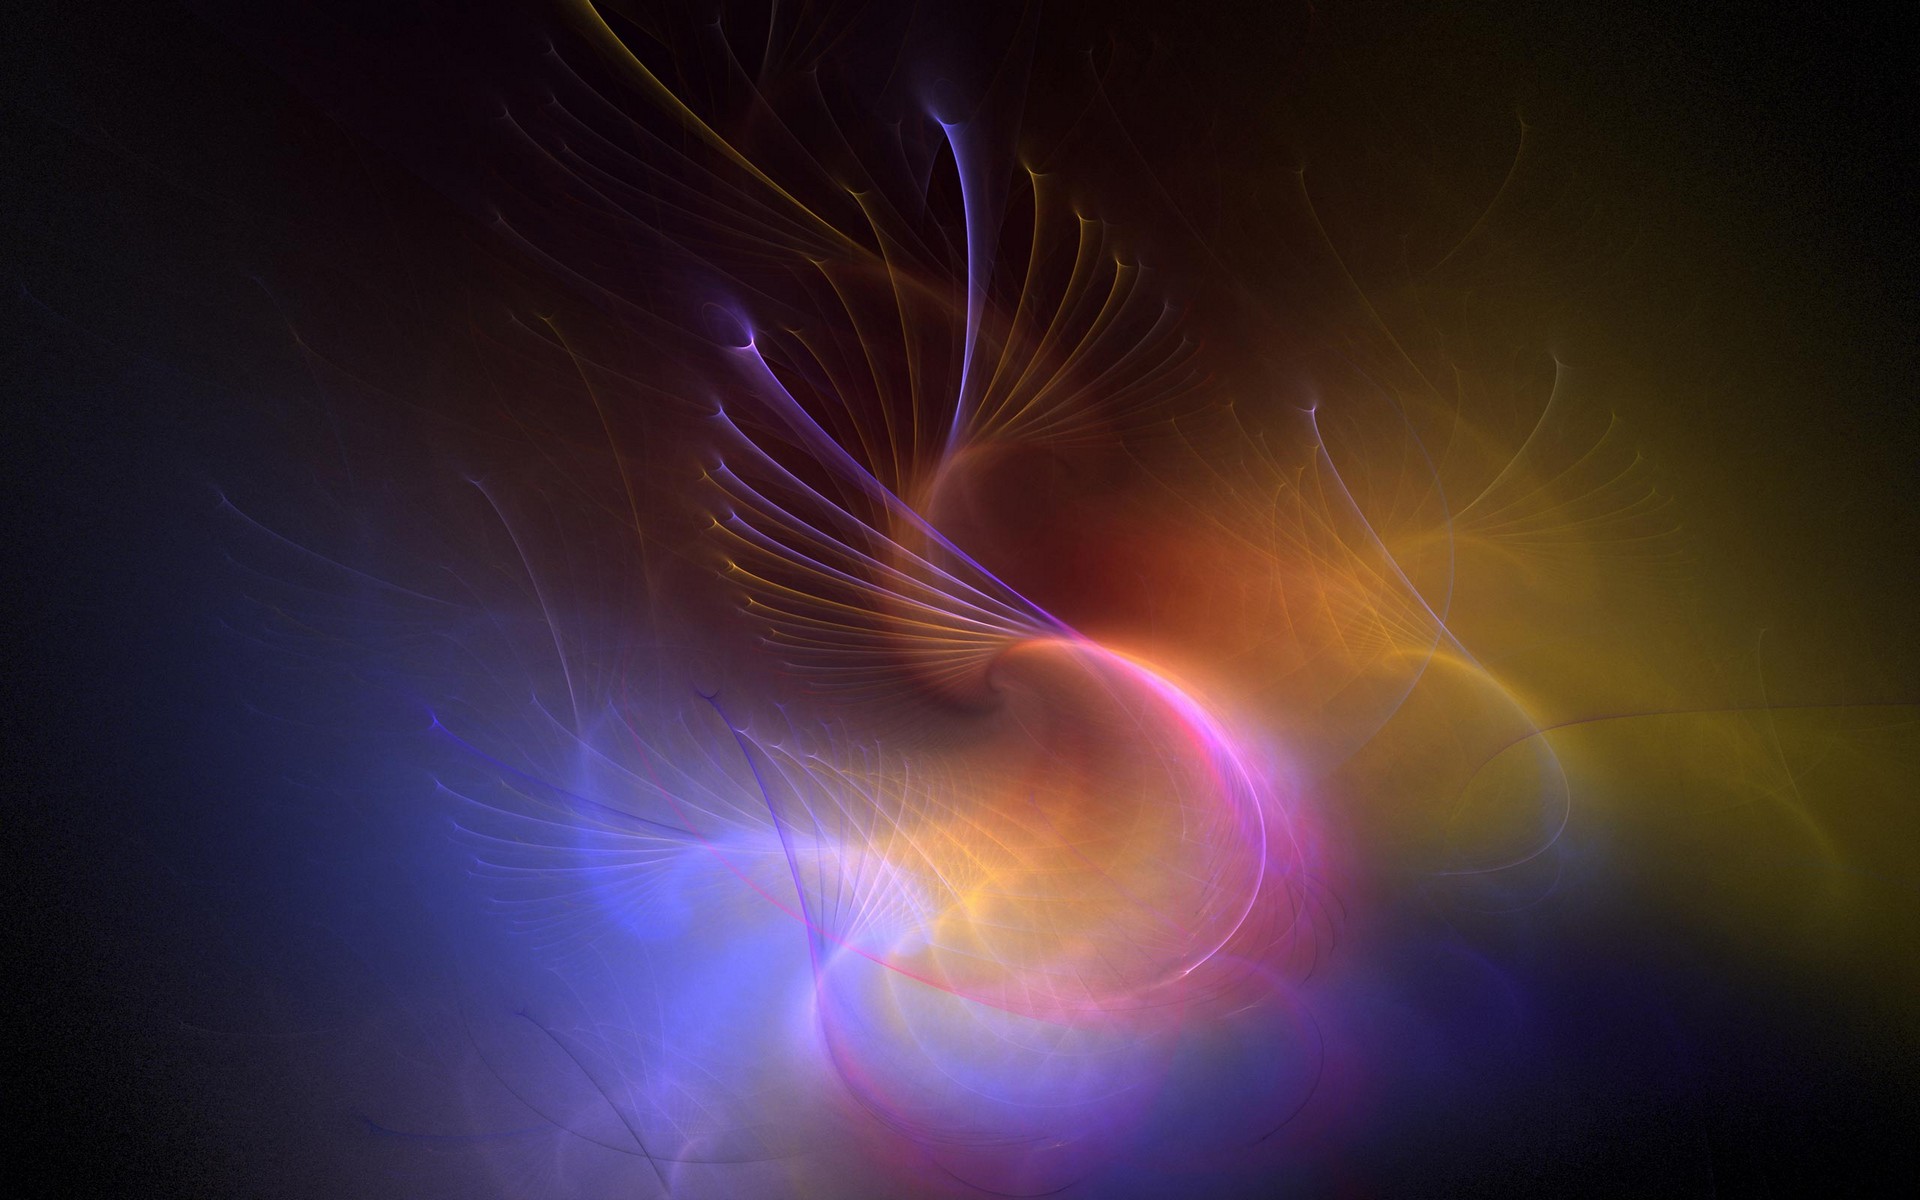 Tendrils digital art wallpaper with a high quality abstract image